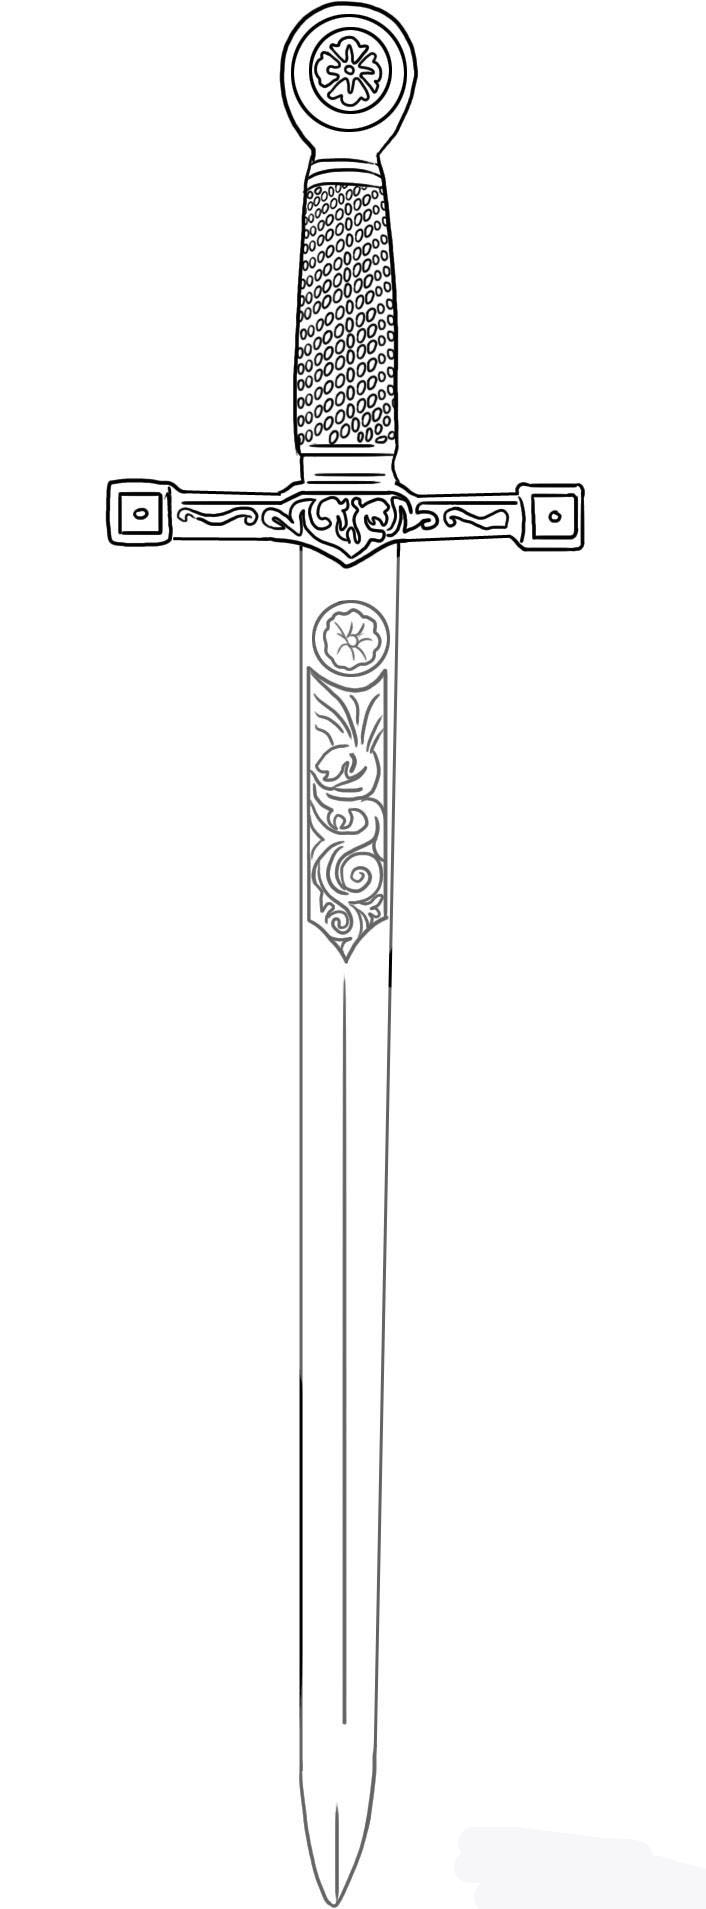 how-to-draw-excalibur-sword-in-the-stone-step-5_1_000000005599_5